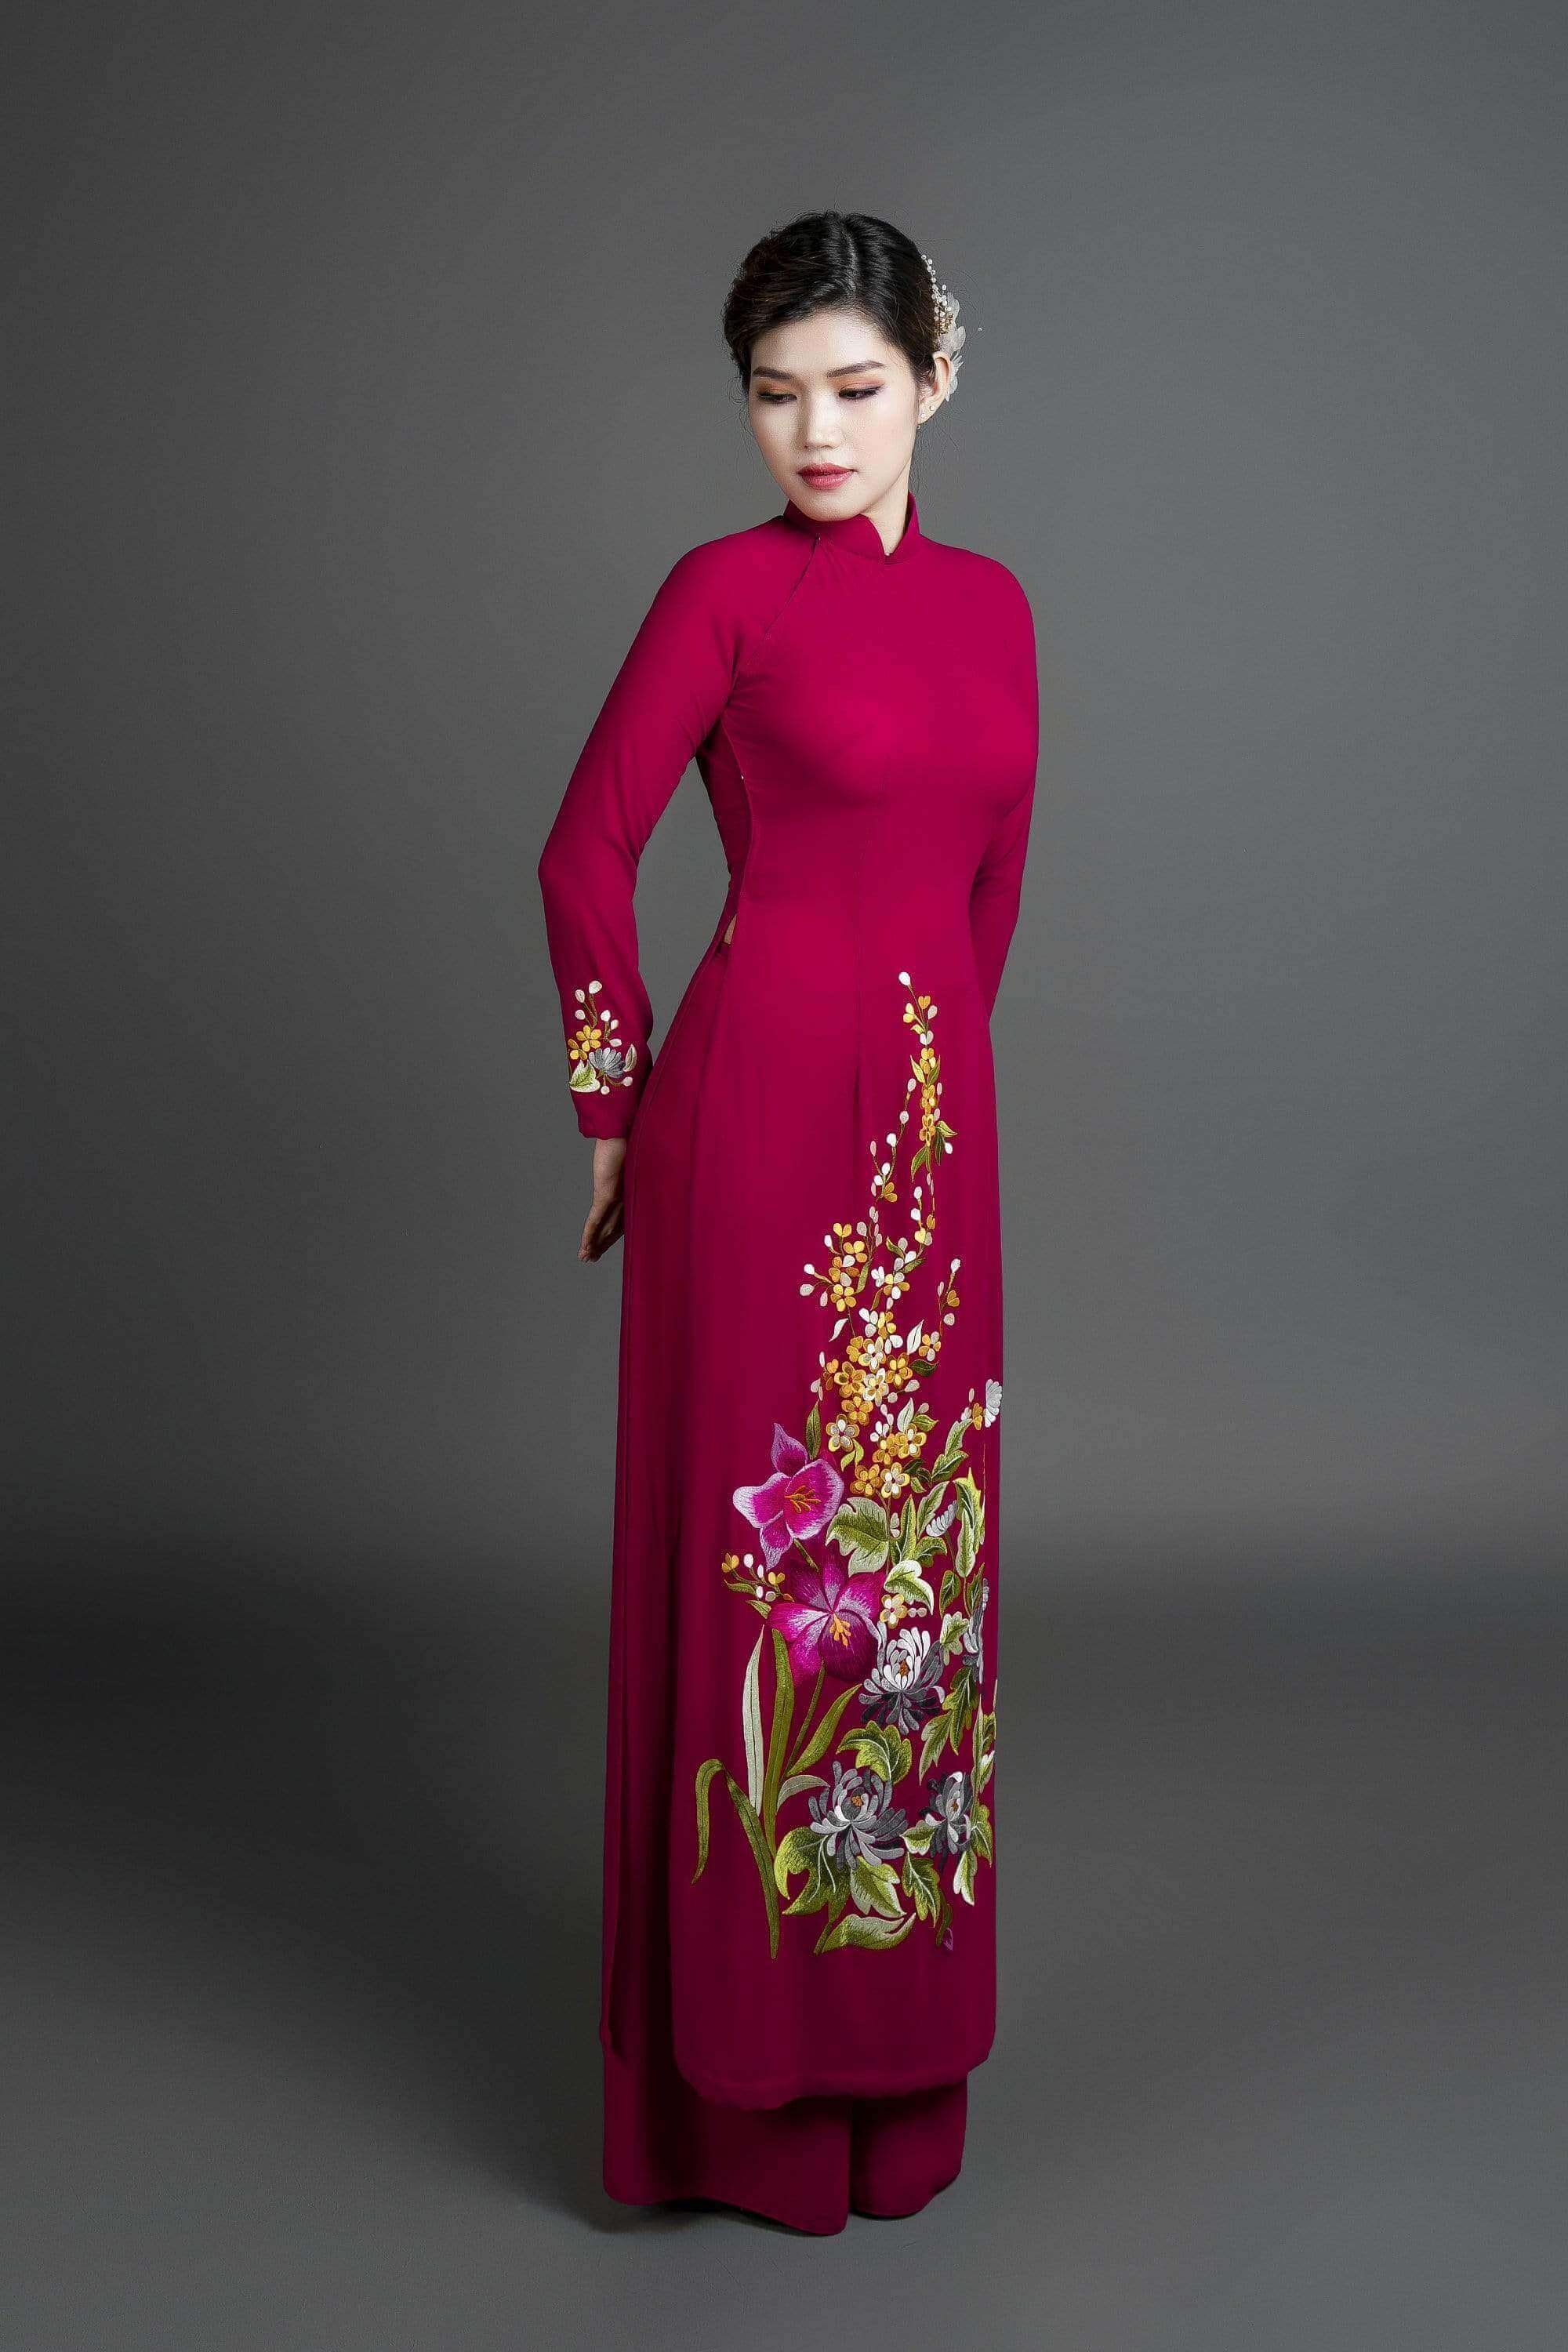 Only Sample US Size 4 - Custom ao dai, Vietnamese traditional